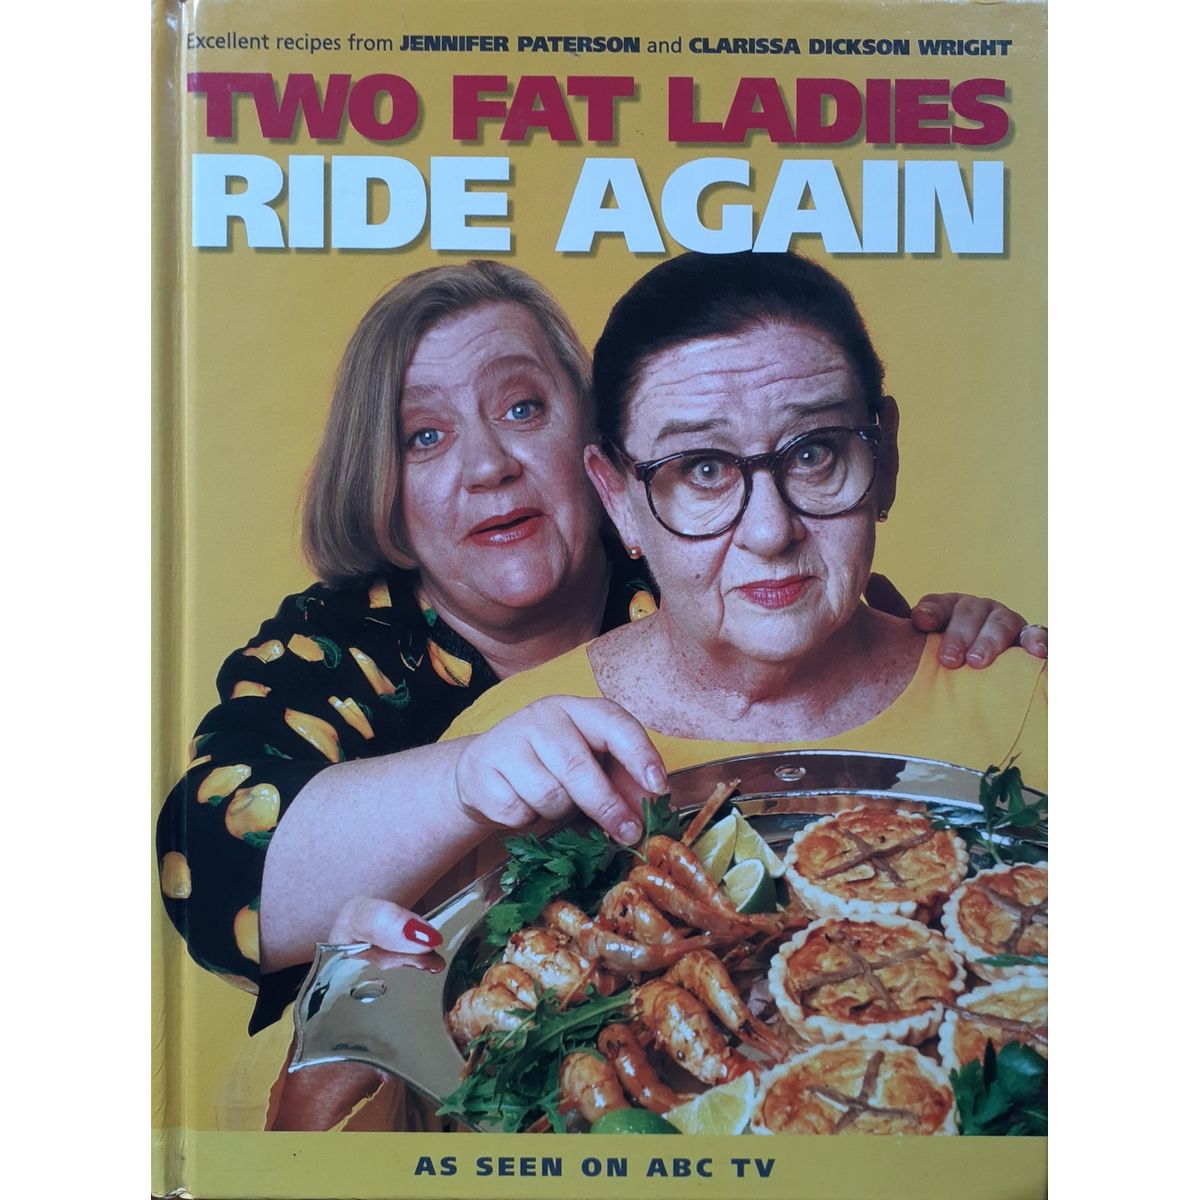 ISBN: 9780733306198 / 0733306195 - Two Fat Ladies: Ride Again by Jennifer Paterson & Clarissa Dickson Wright [1998]